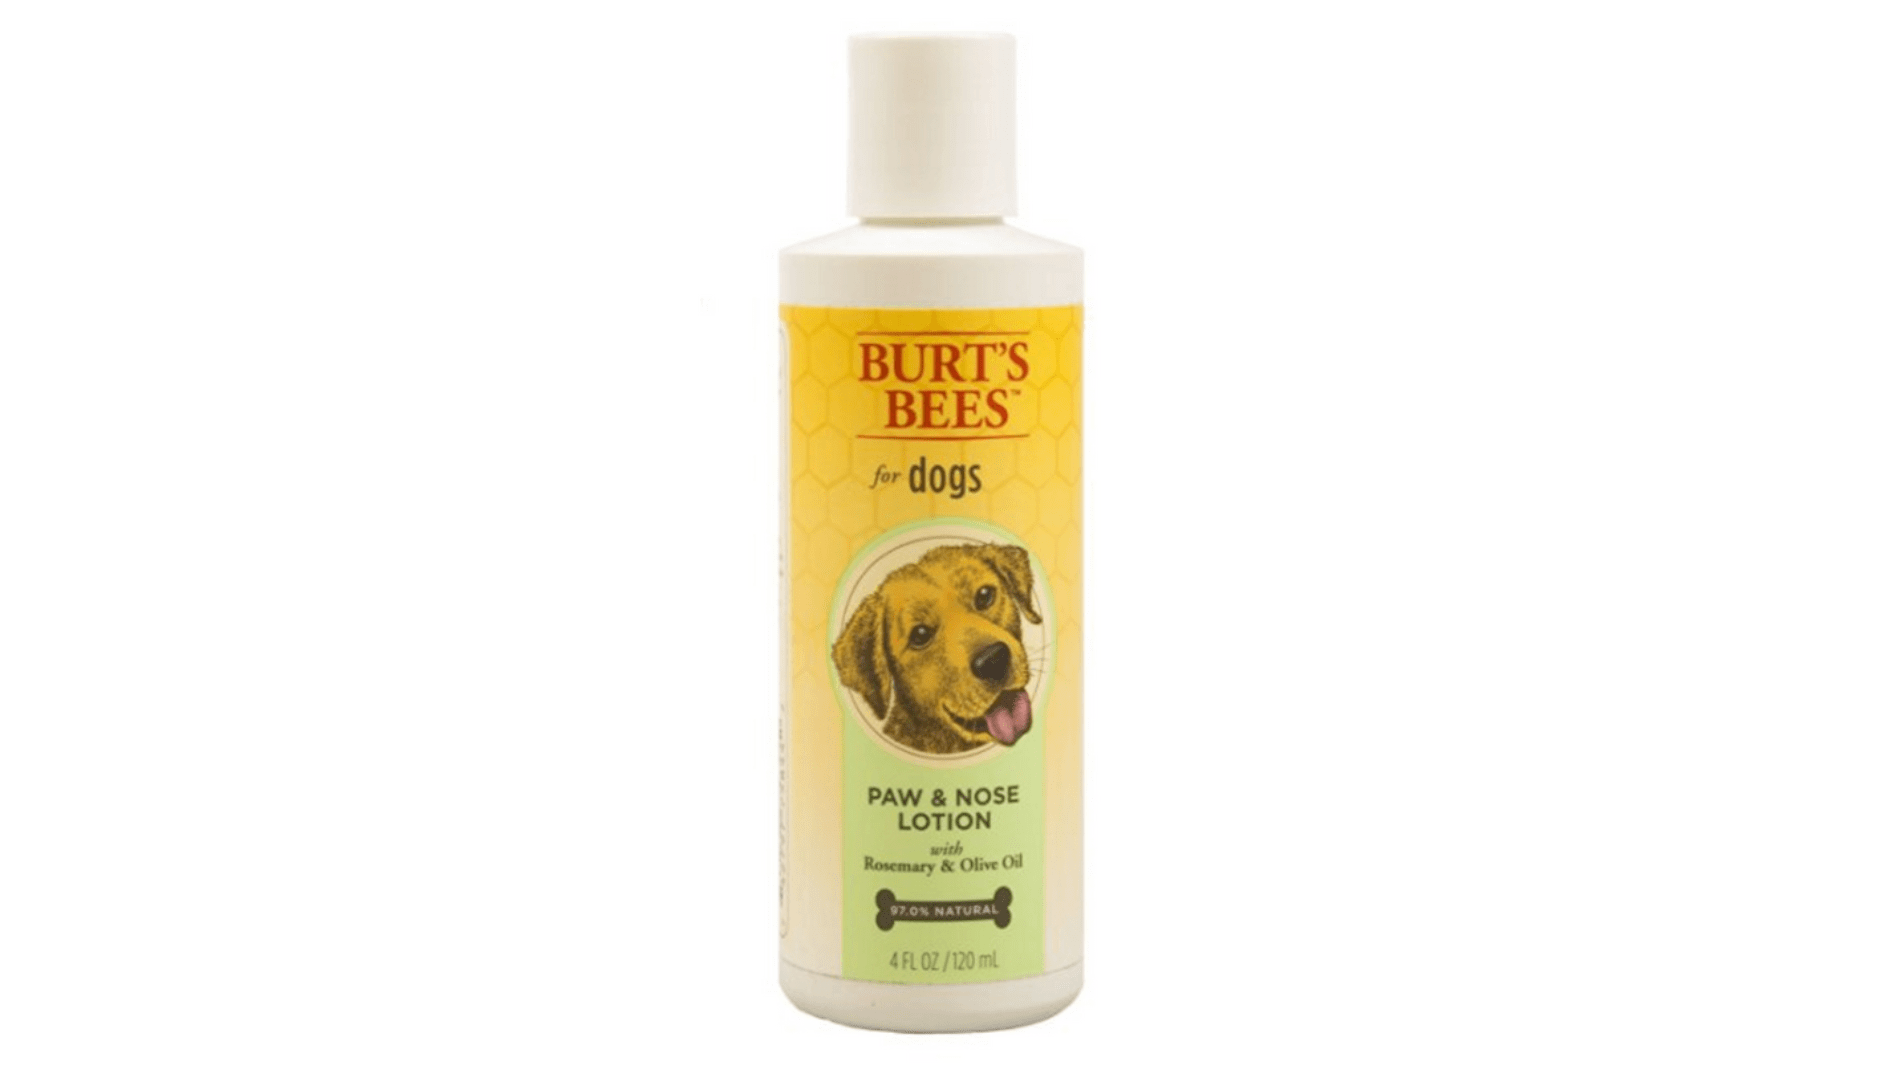 Burt’s Bess Paw and Nose Lotion